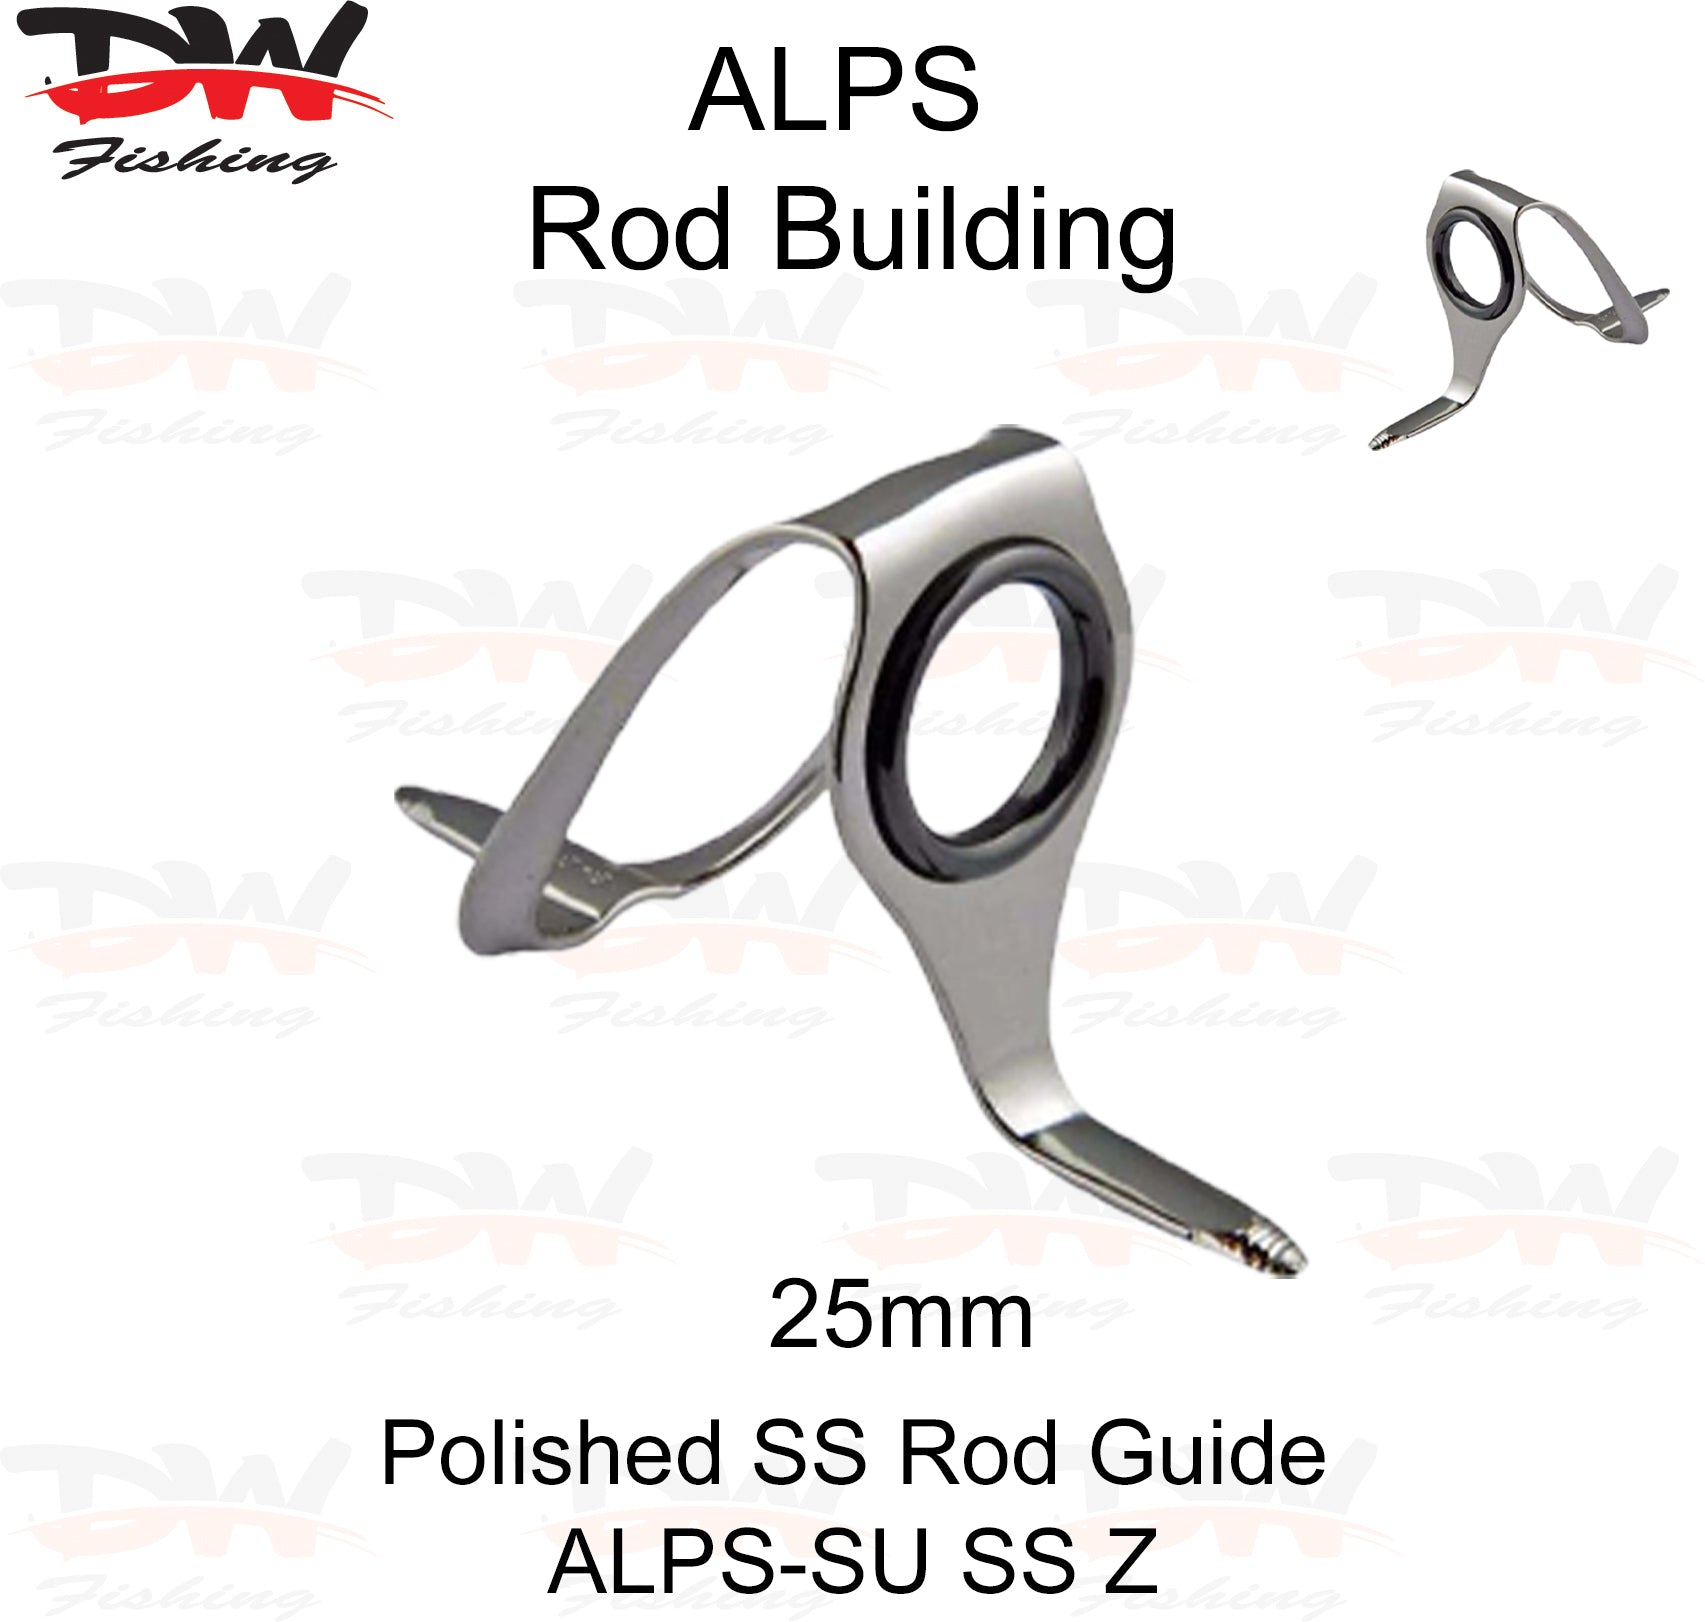 ALPS Stand Up Rod Guide 316 SS, Rod Building